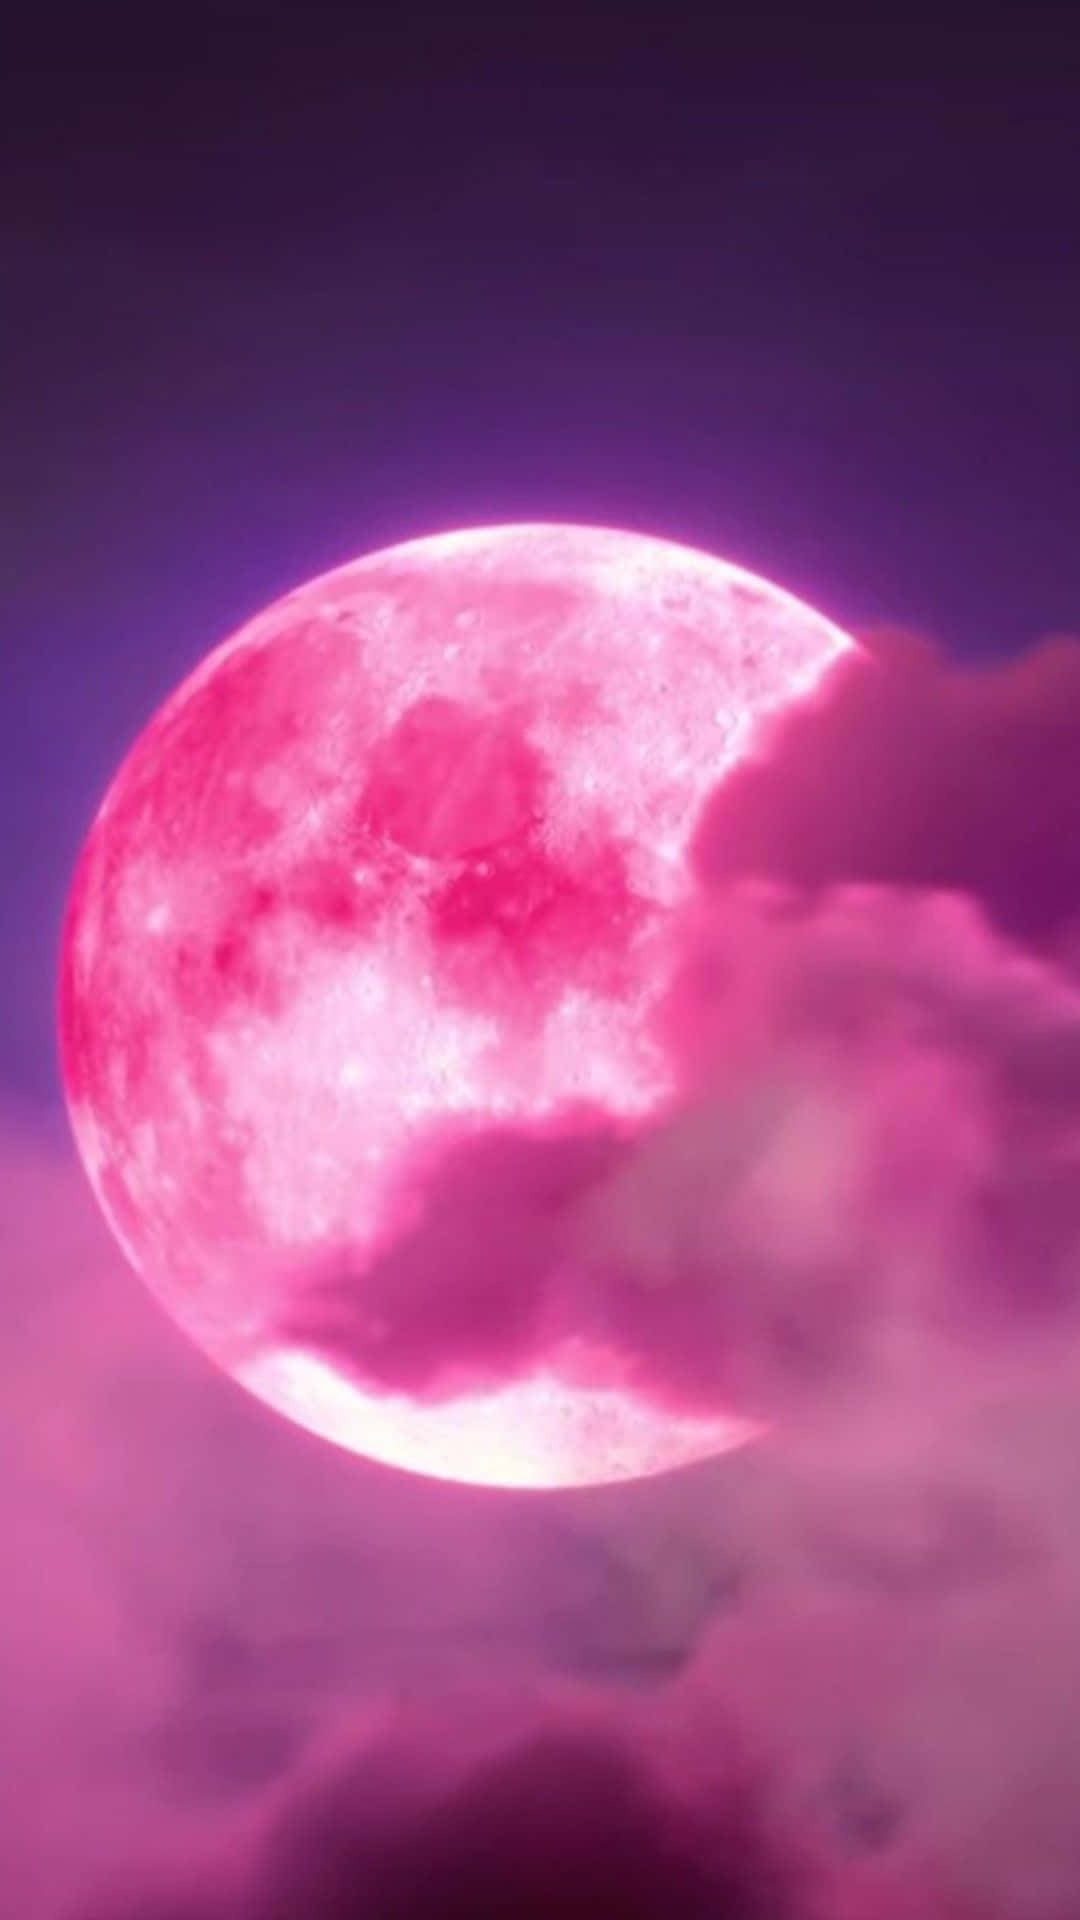 Enjoy the beautiful view of the pink moon rising over the ocean